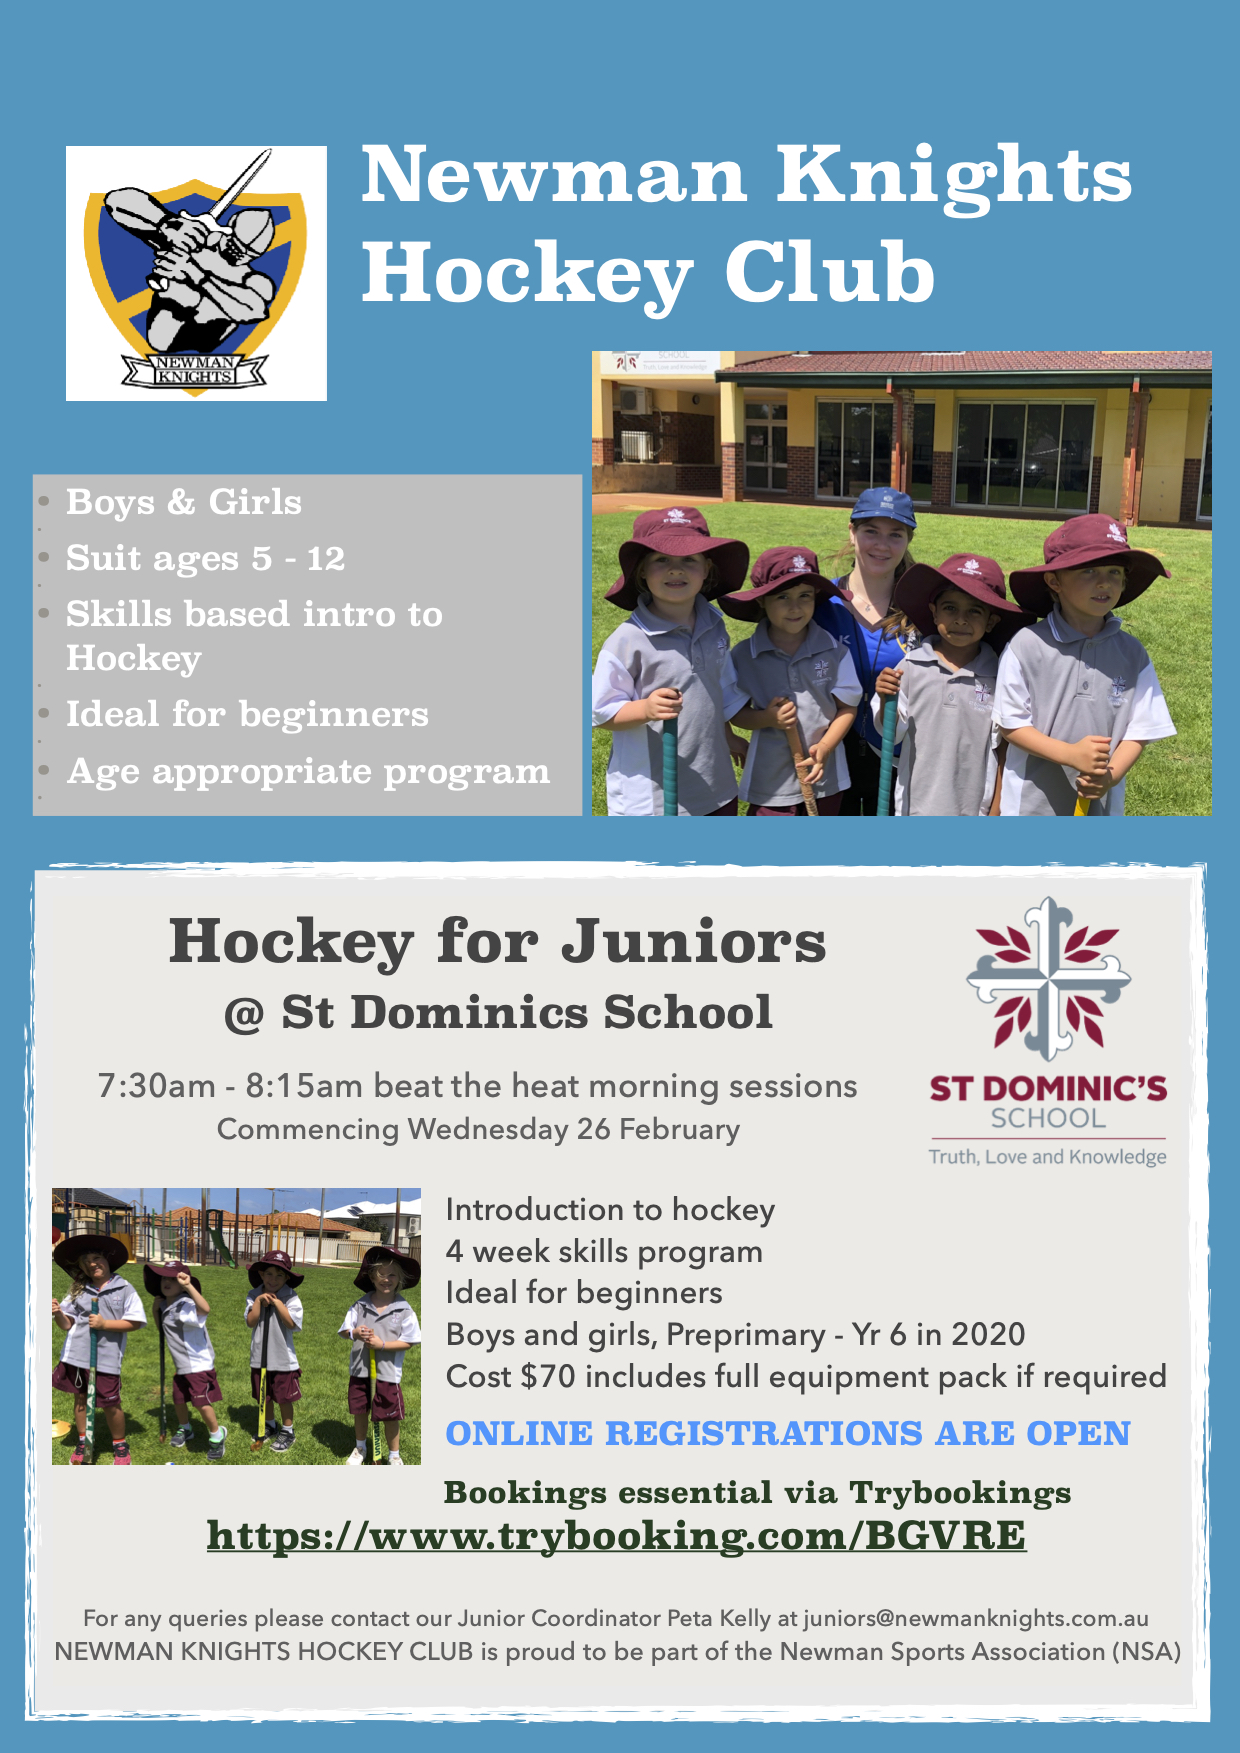 Hockey for Juniors at St Dominic's